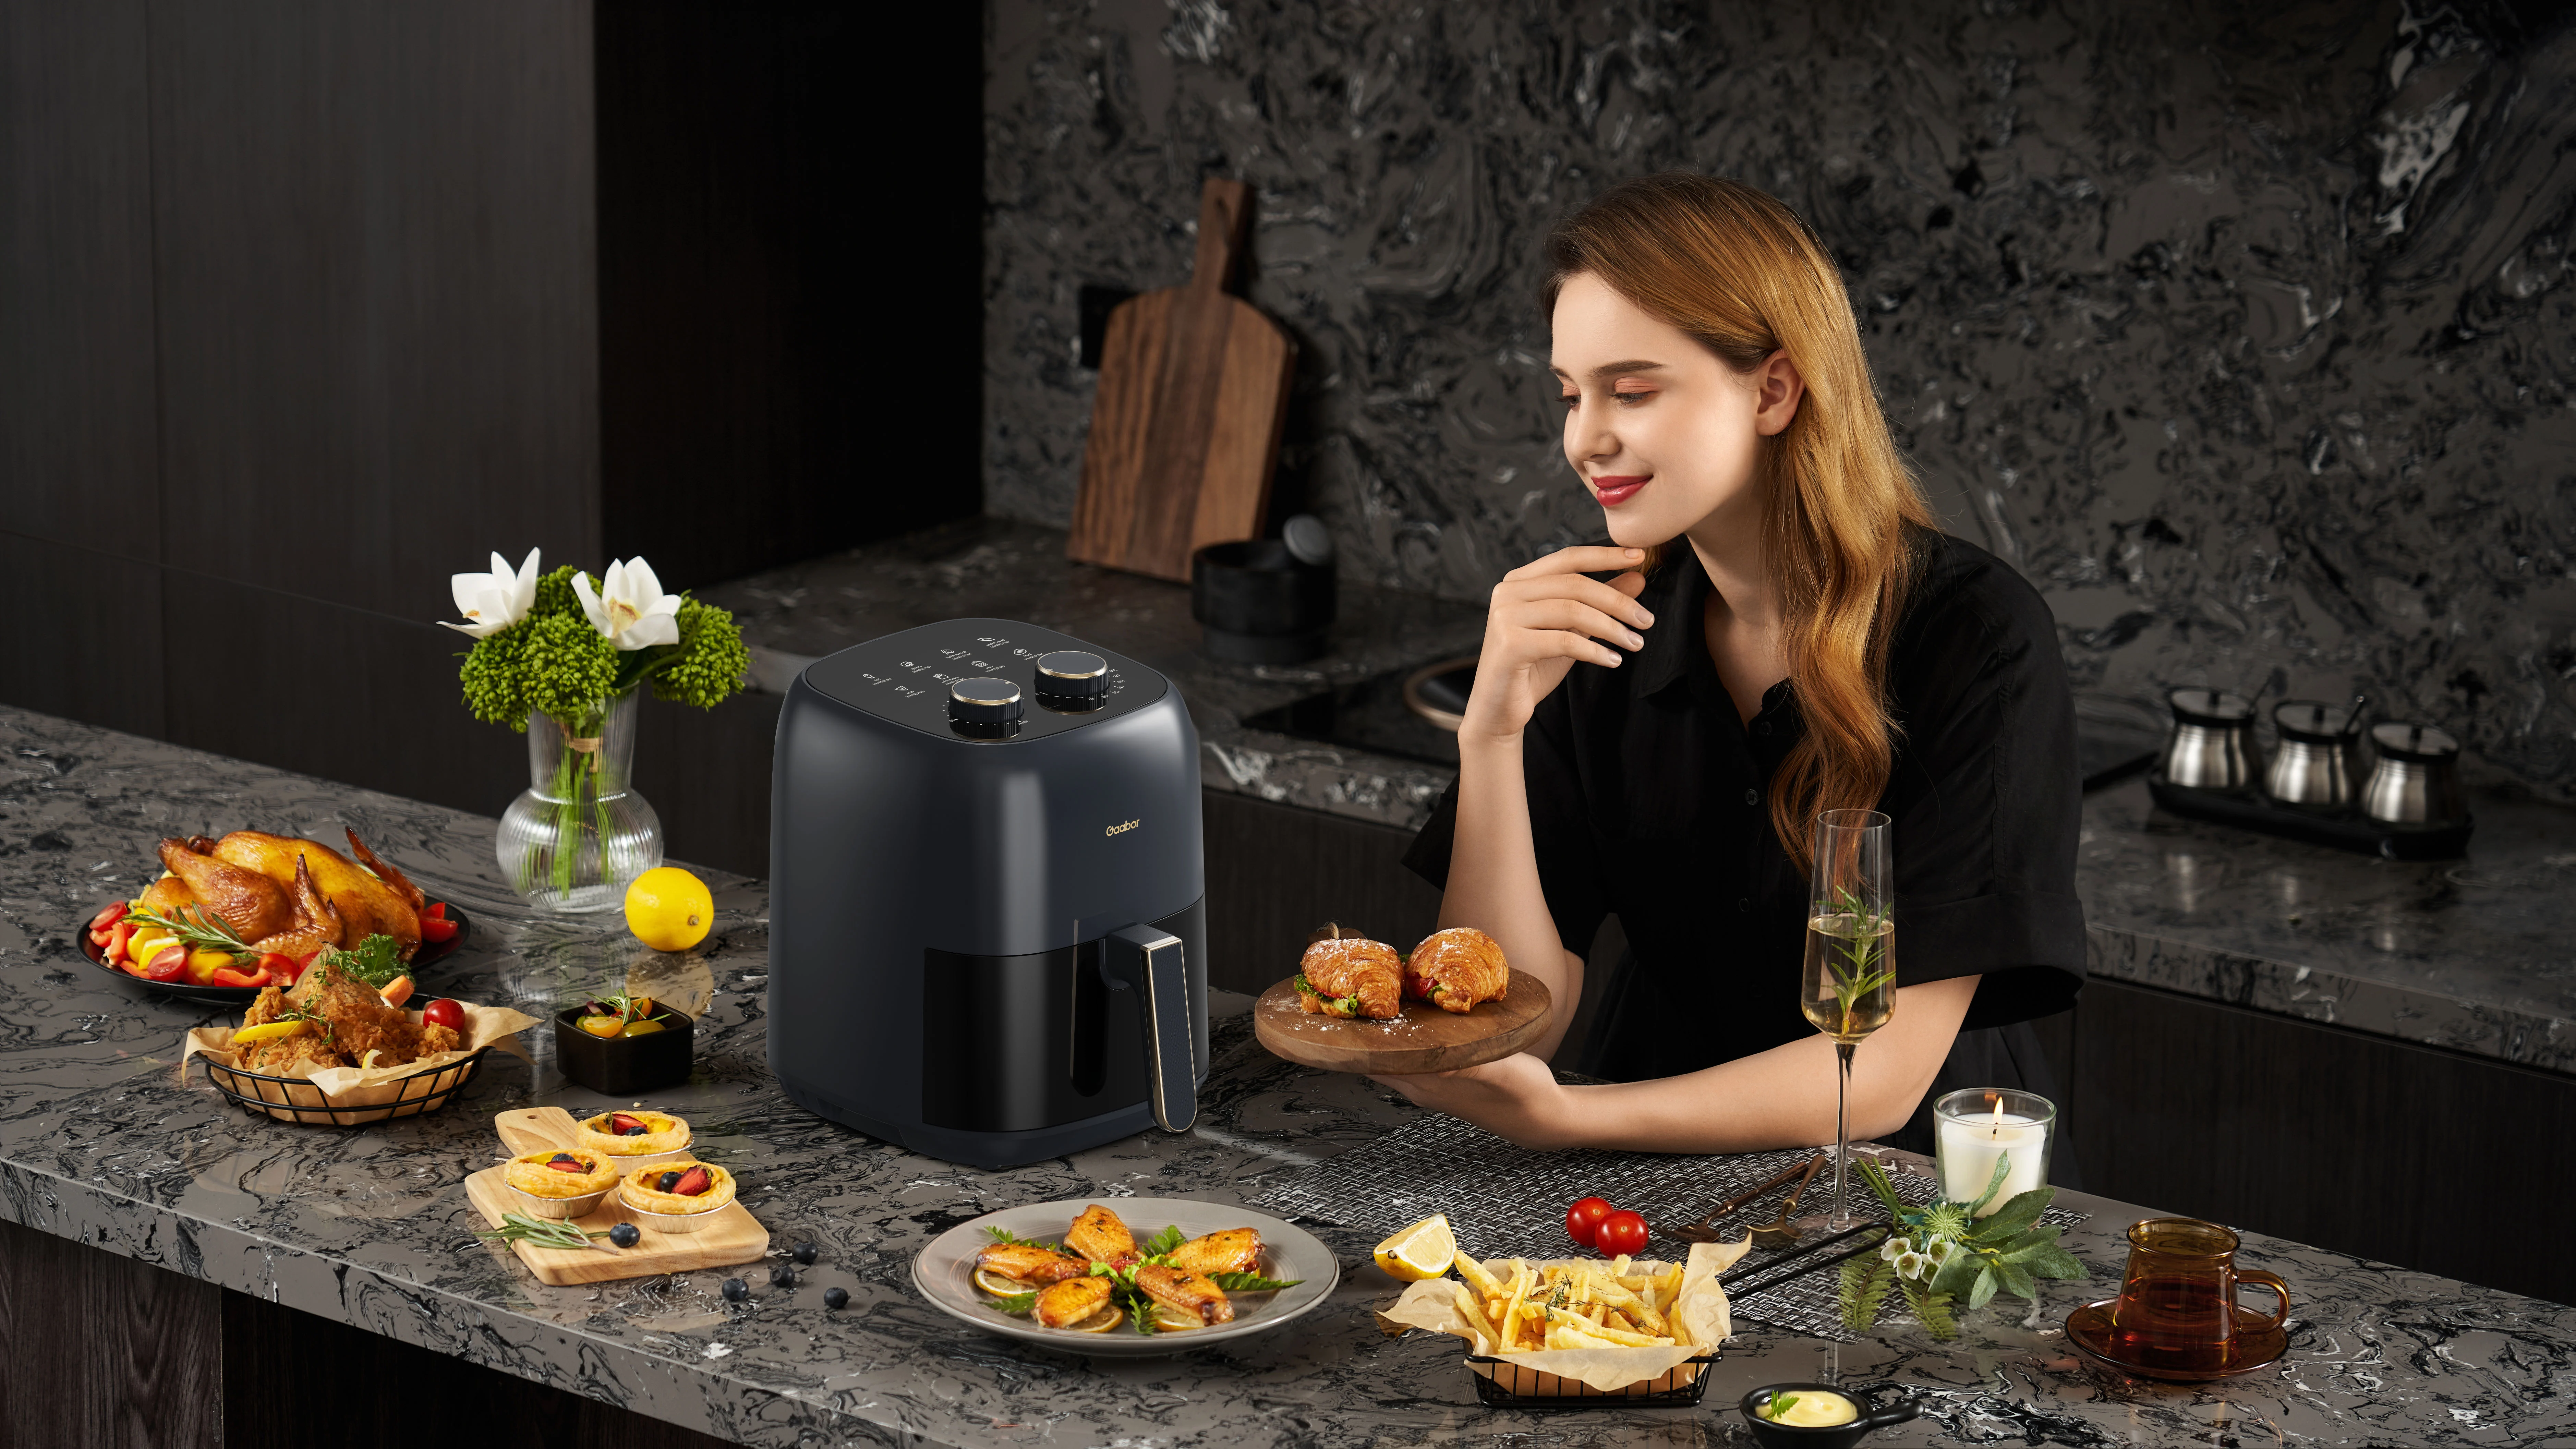 Bear Air Fryer Home New Special Special Fully Automatic Air Fryer  Degreasing French Fries Machine No Fryer Small